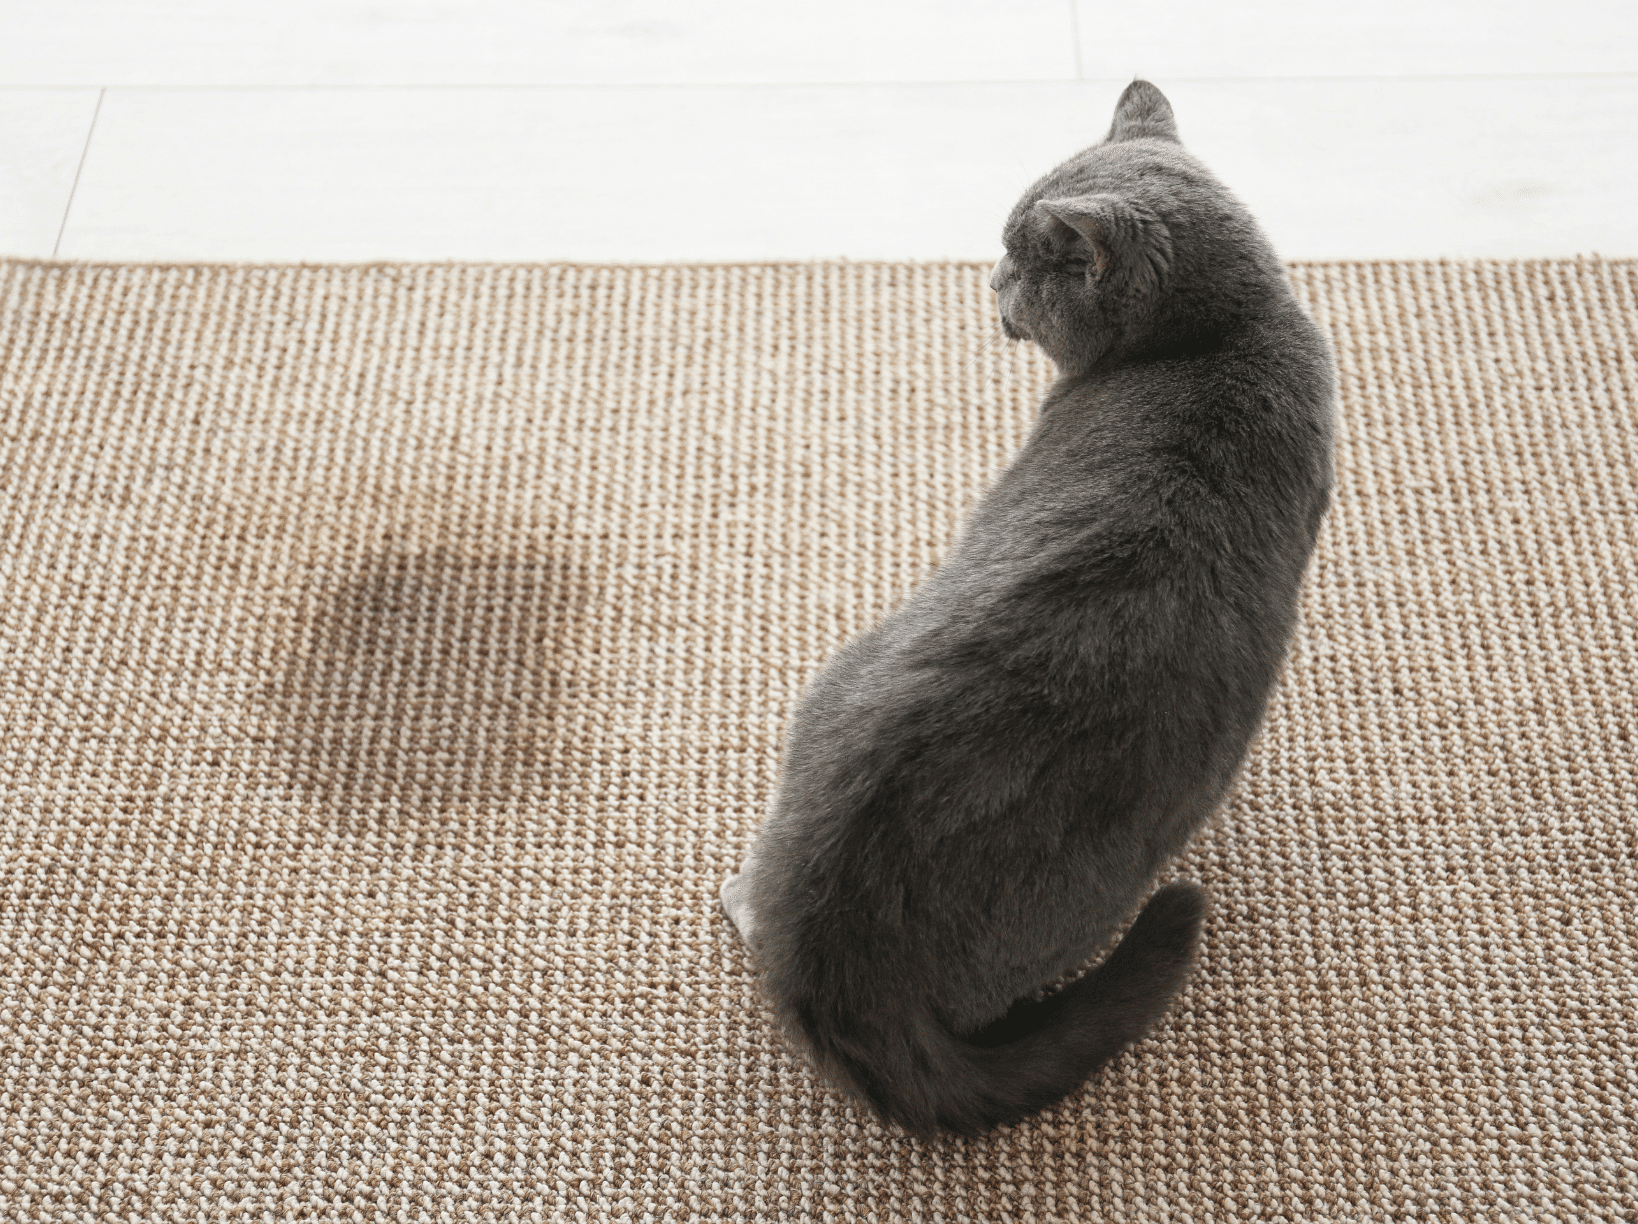 Pet stains cat looking at mark on carpet 1624 x 1224px